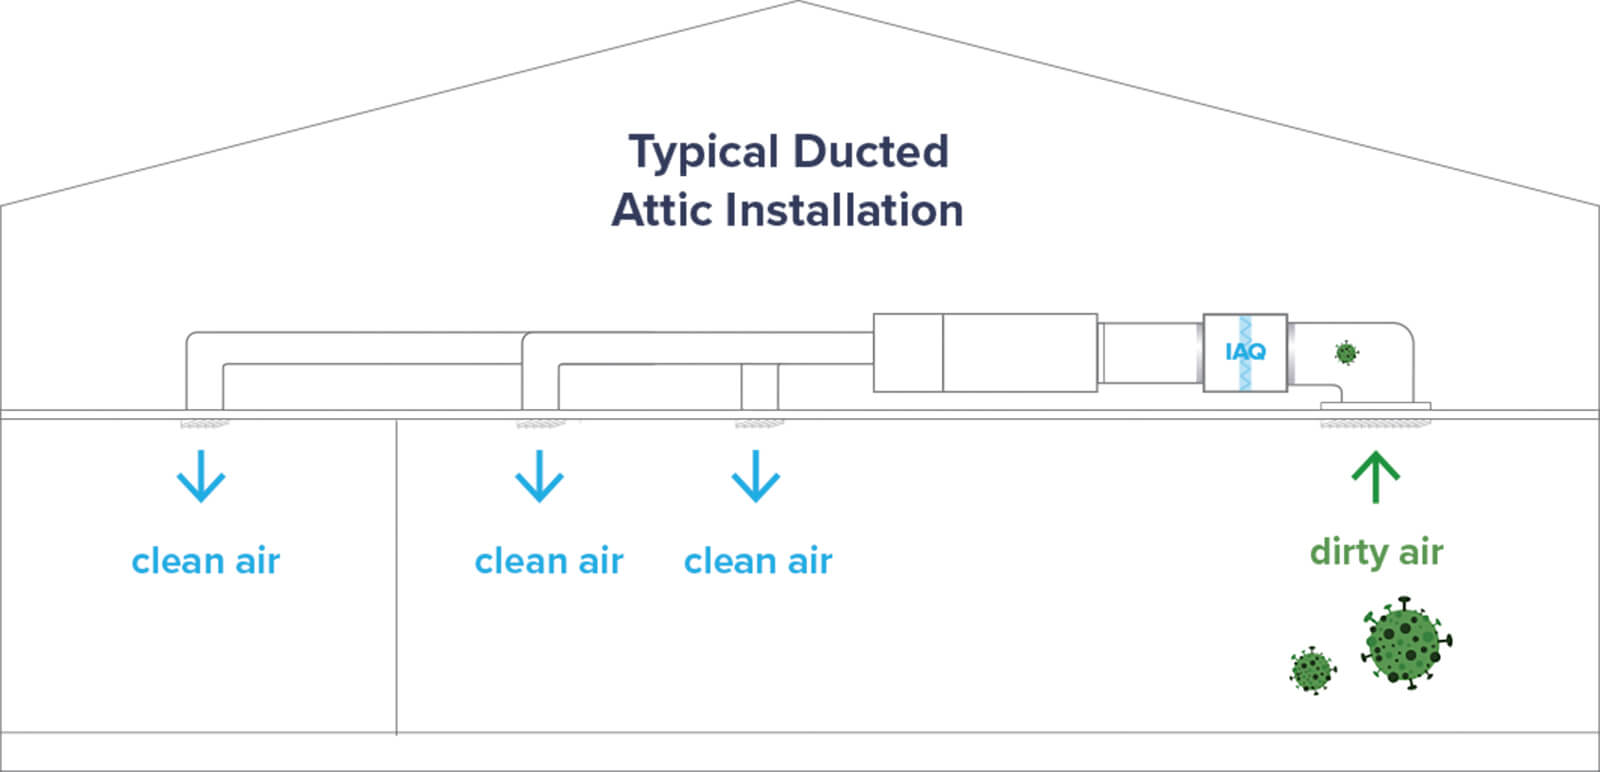 Typical ducted attic installation